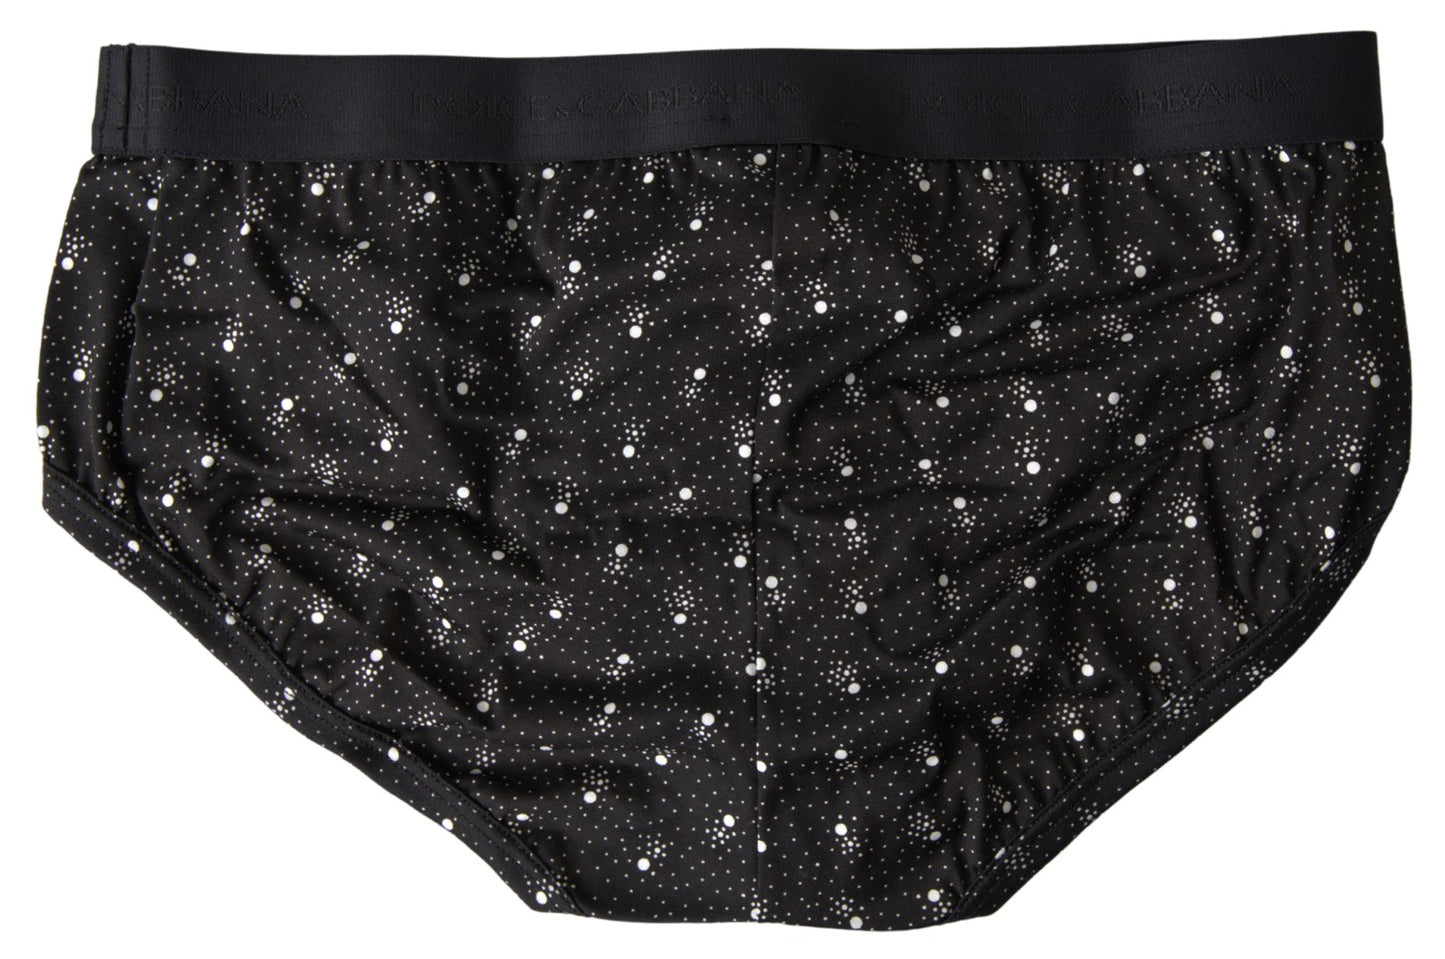 Elegant Black Dotted Brief with Comfort Fit